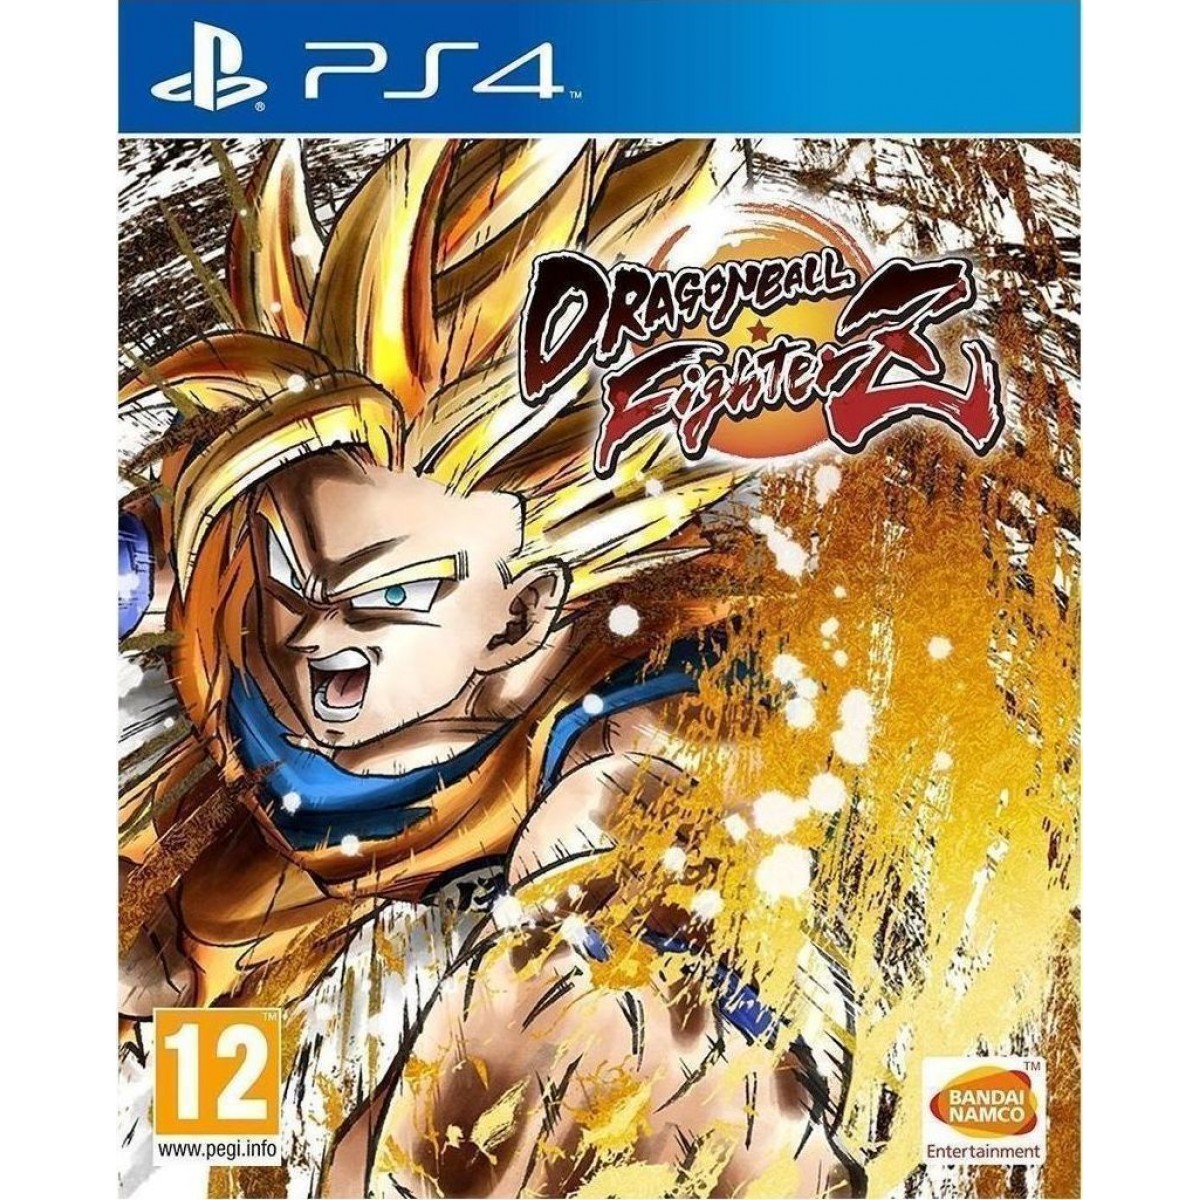 PS4 DRAGON BALL FIGHTERZ GAME